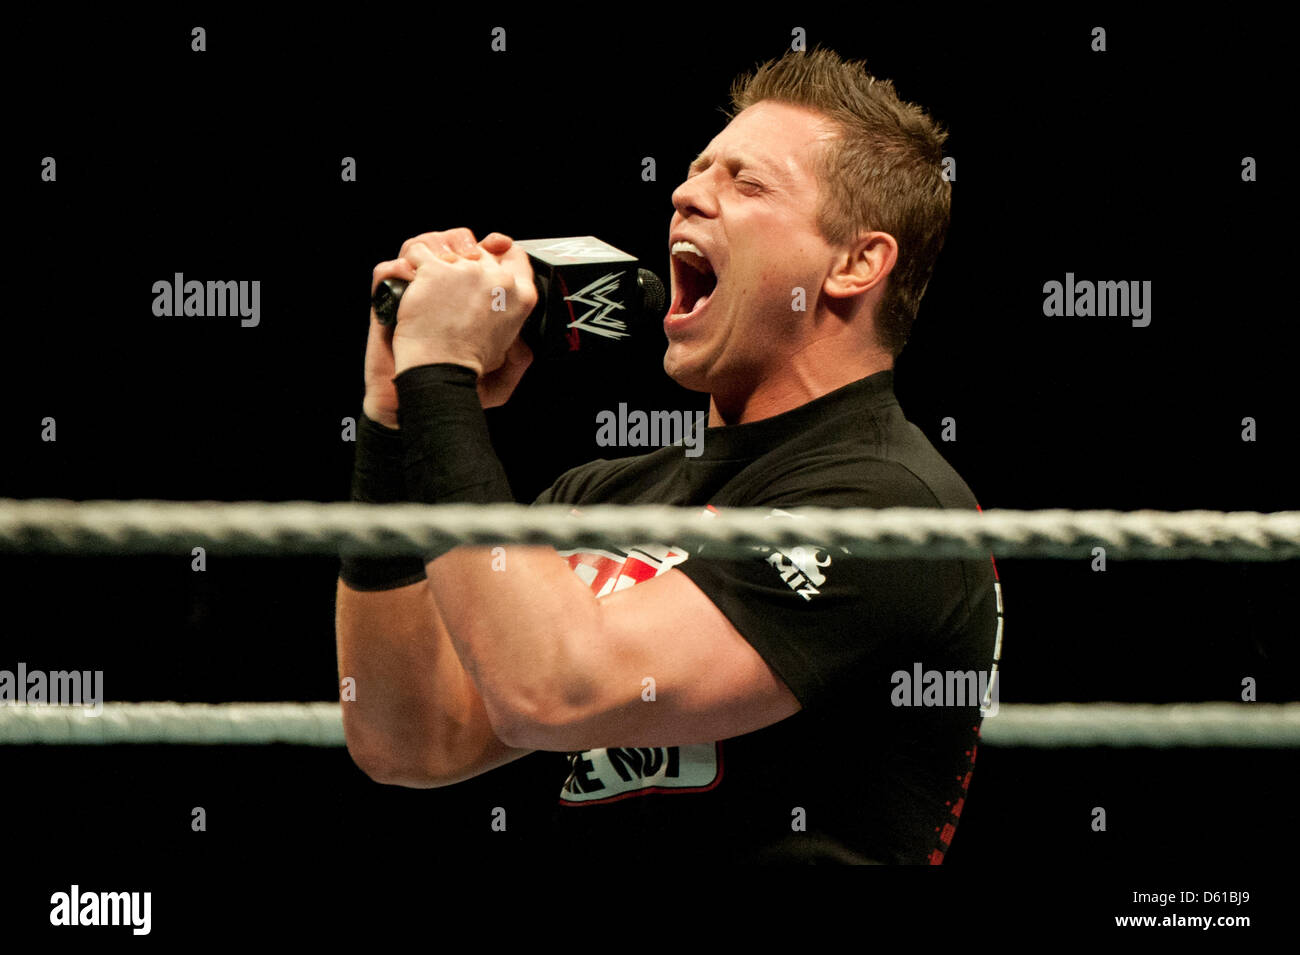 US-wrestler The Miz shouts into a microphone prior to a fight at the RAW WrestleMania Revenge Tour at the o2 World canue in Berlin, Germany, 14 April 2012. The WWE (World Wrestling Entertainment) celebrates its 20th German anniversary this April. The first show in Germany was staged in Kiel, Germany, in April 1992. Photo: Sebastian Kahnert Stock Photo